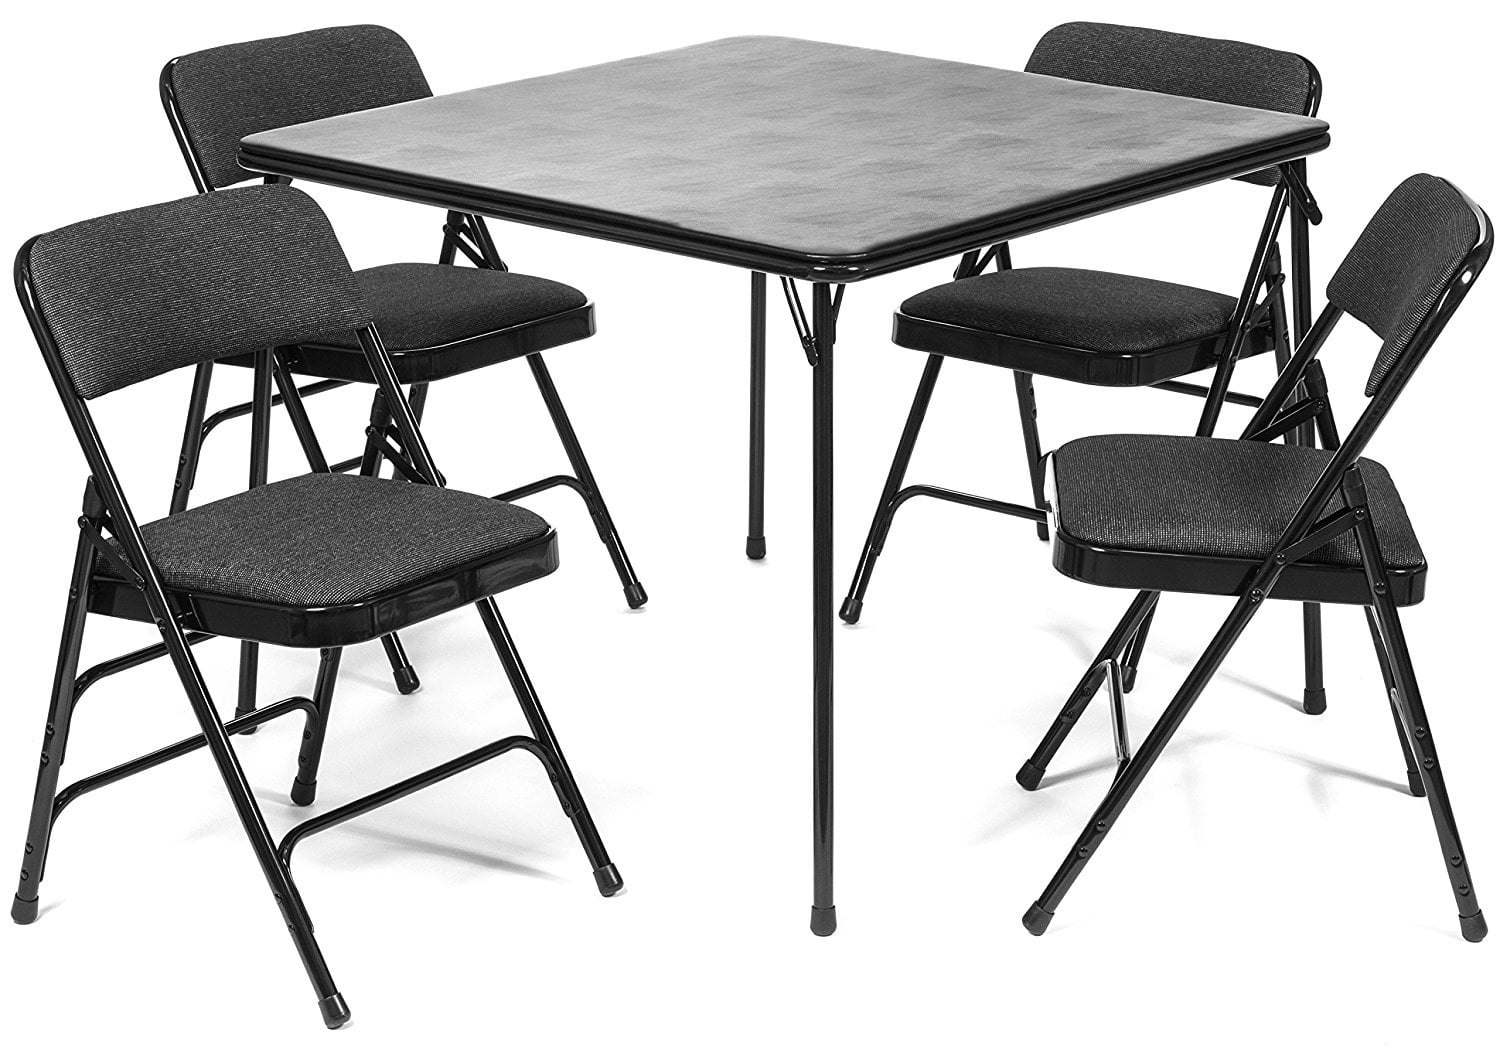 5pc. XL Series Folding Card Table and Triple Braced Fabric Padded Chair Set, Commercial Quality, Black